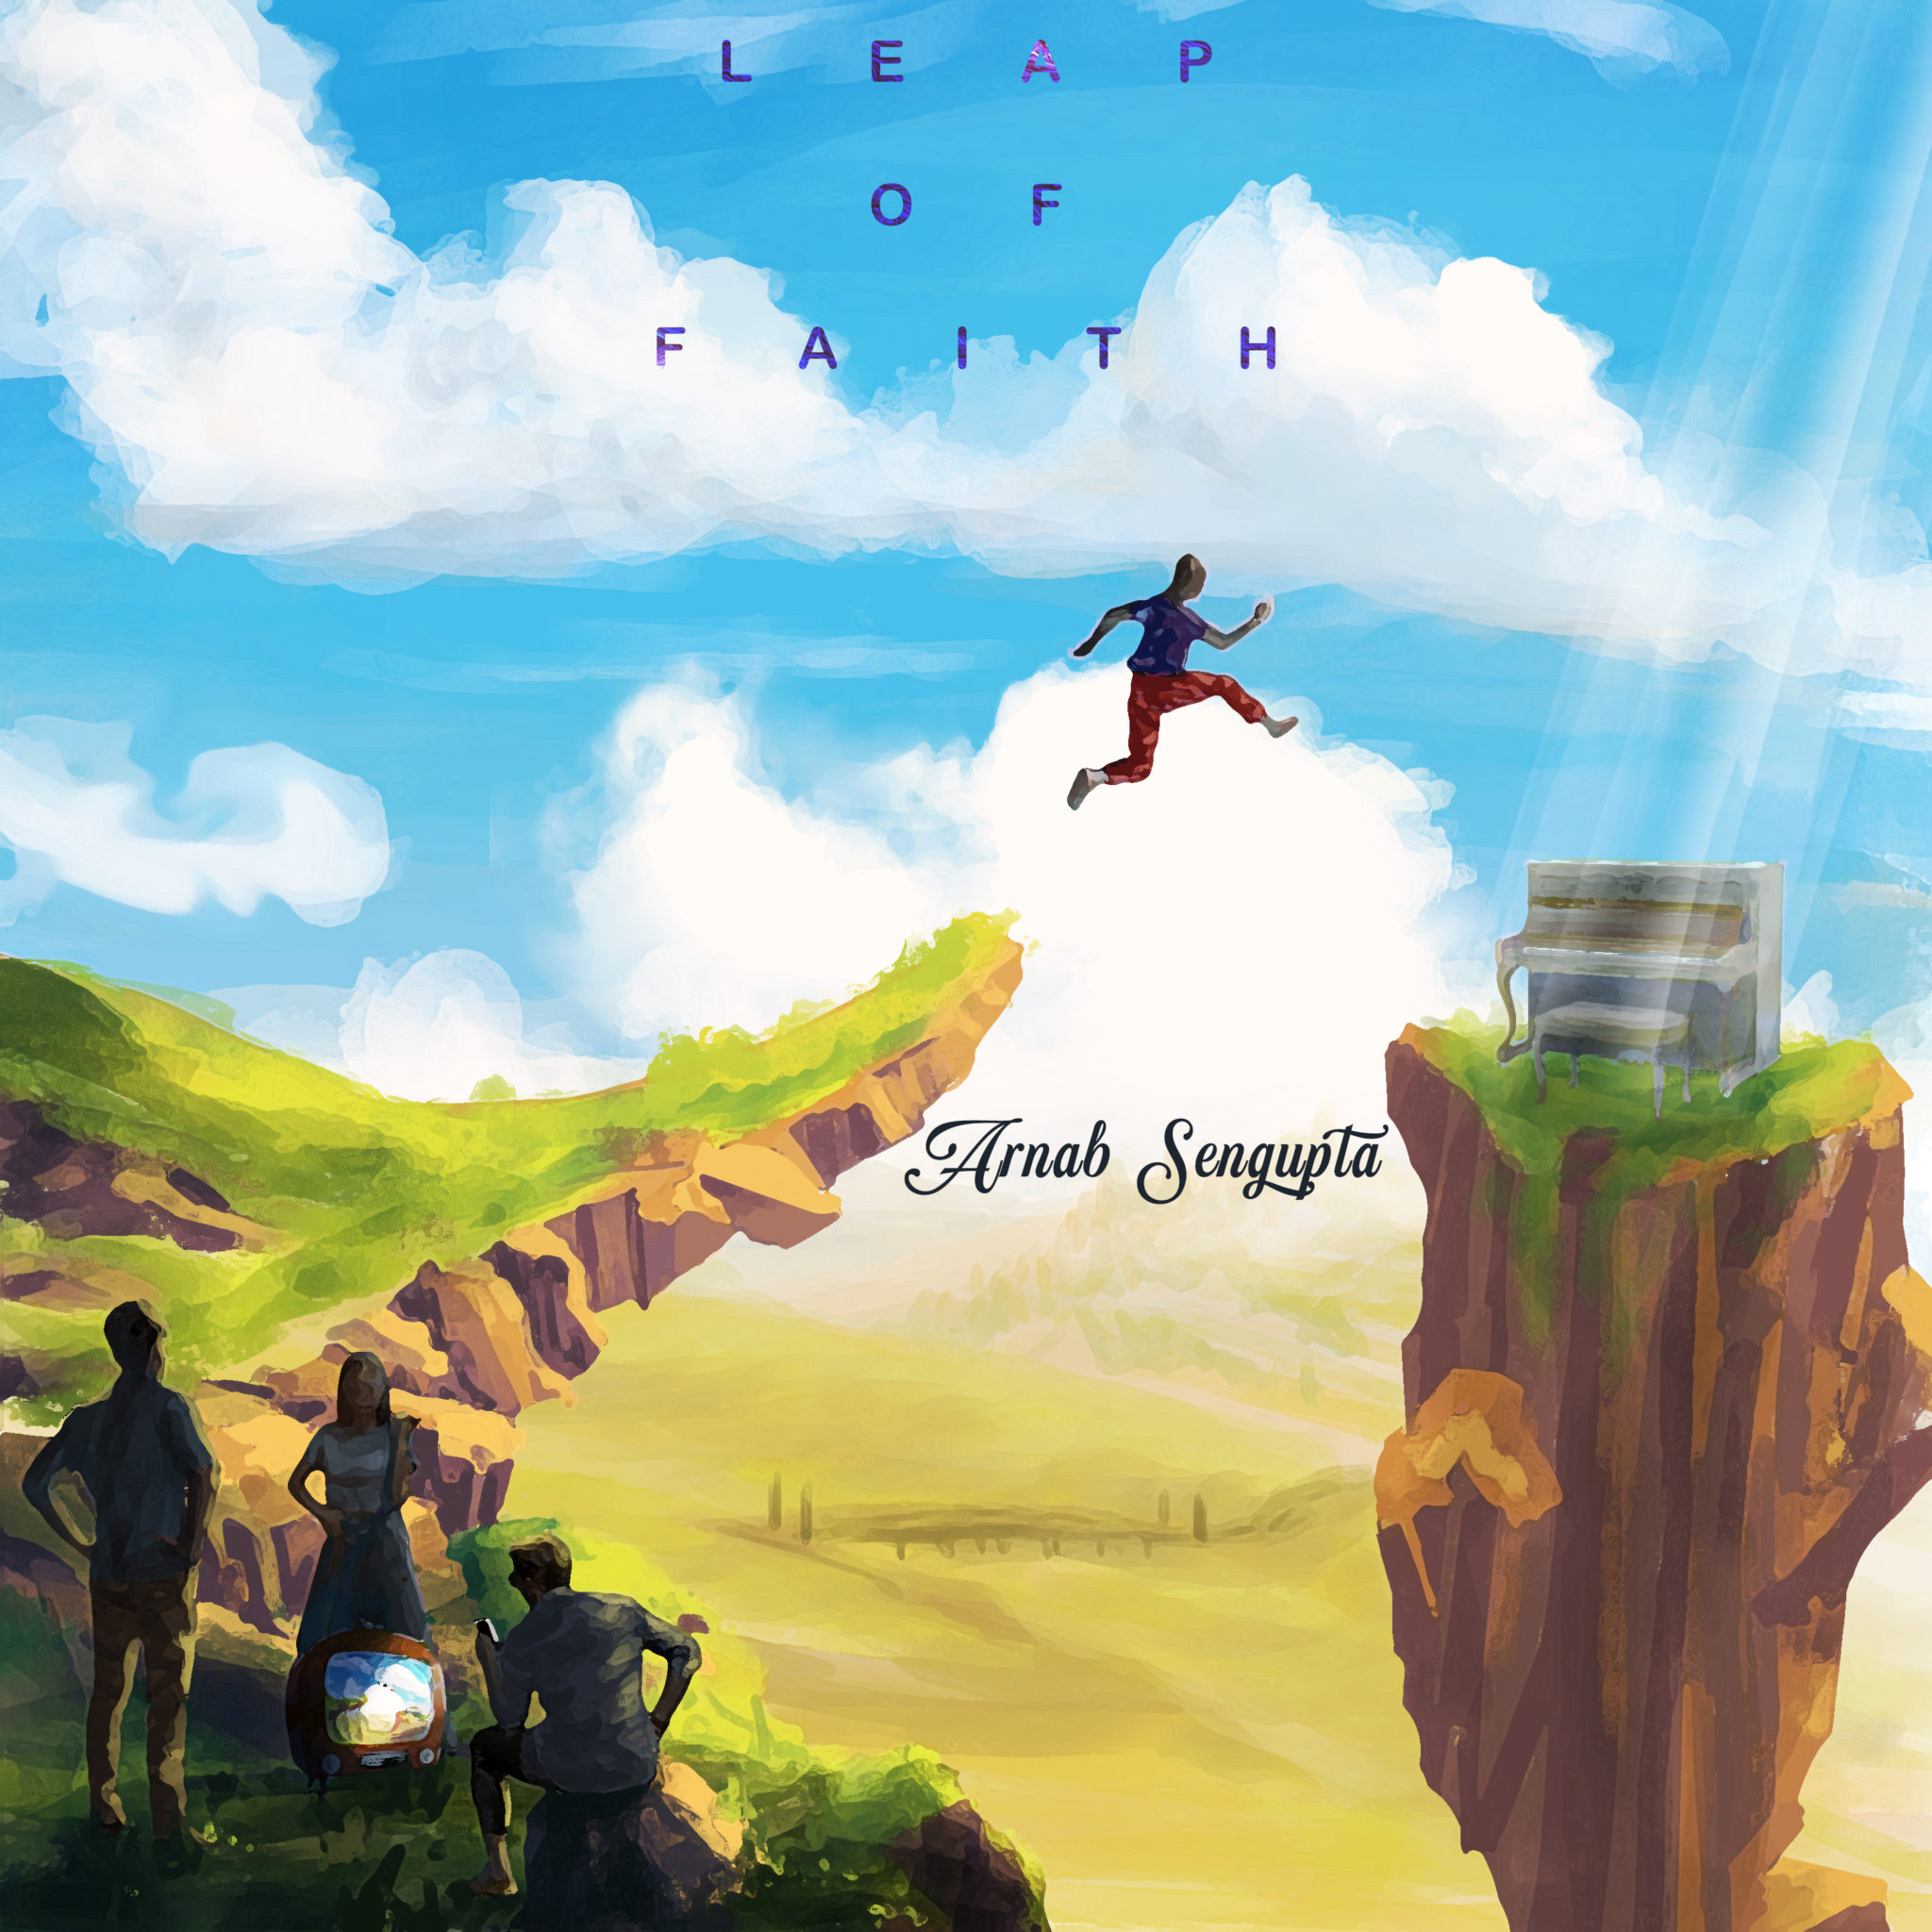 Arnab Sengupta - 'Leap of Faith' Review | Opinions | LIVING LIFE FEARLESS